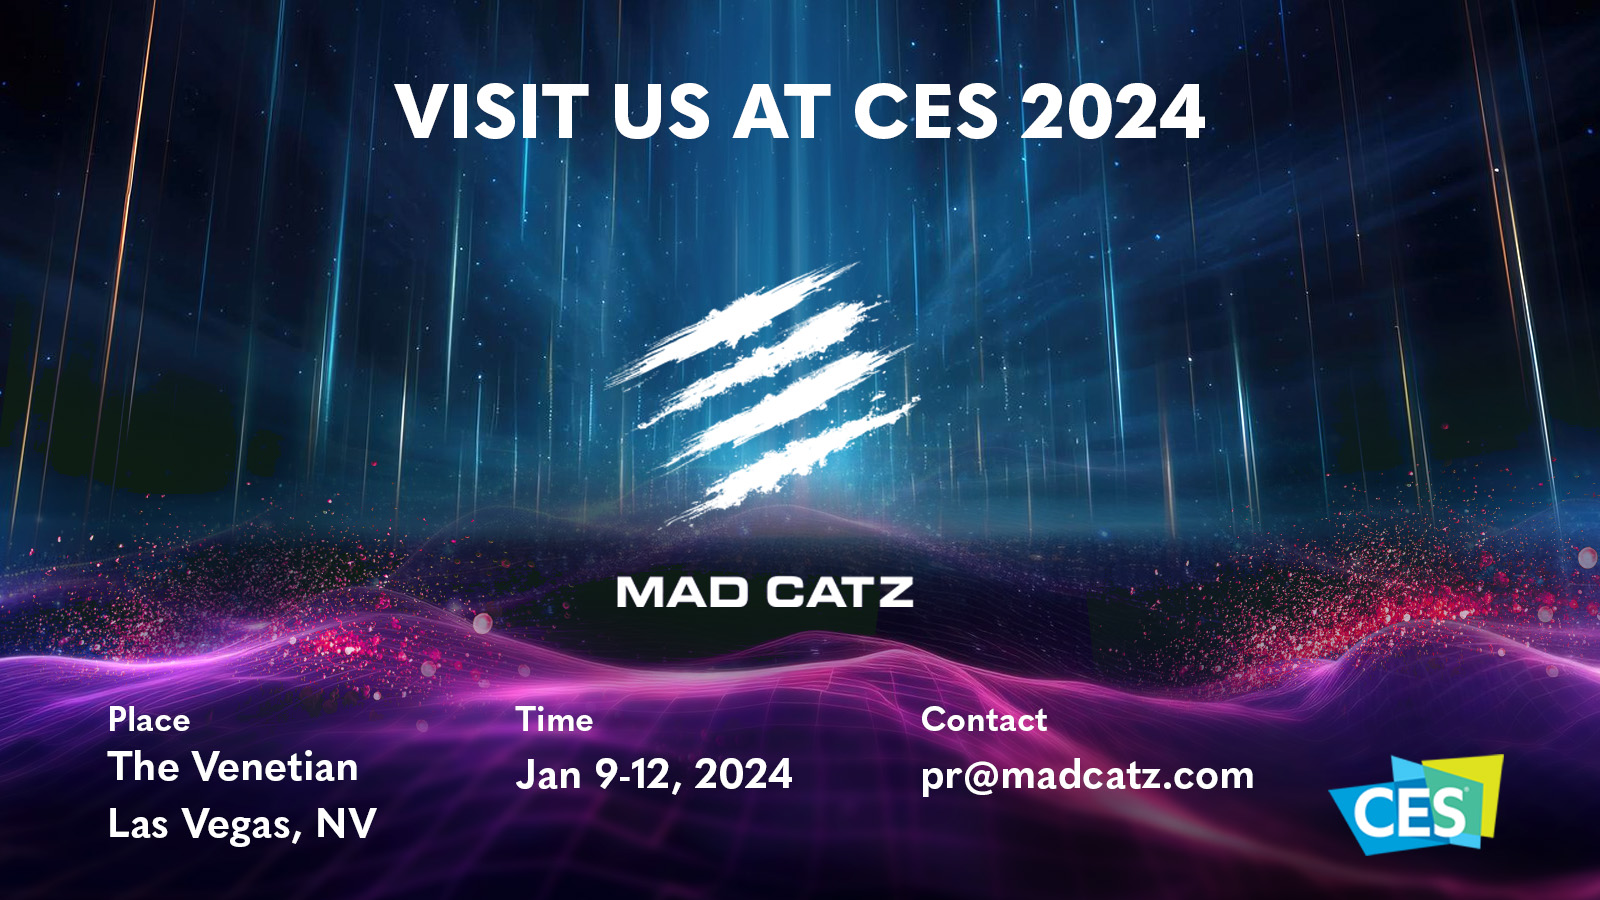 Play the Demo and Meet the Developers at the Mad Catz Suite, Venetian Hotel